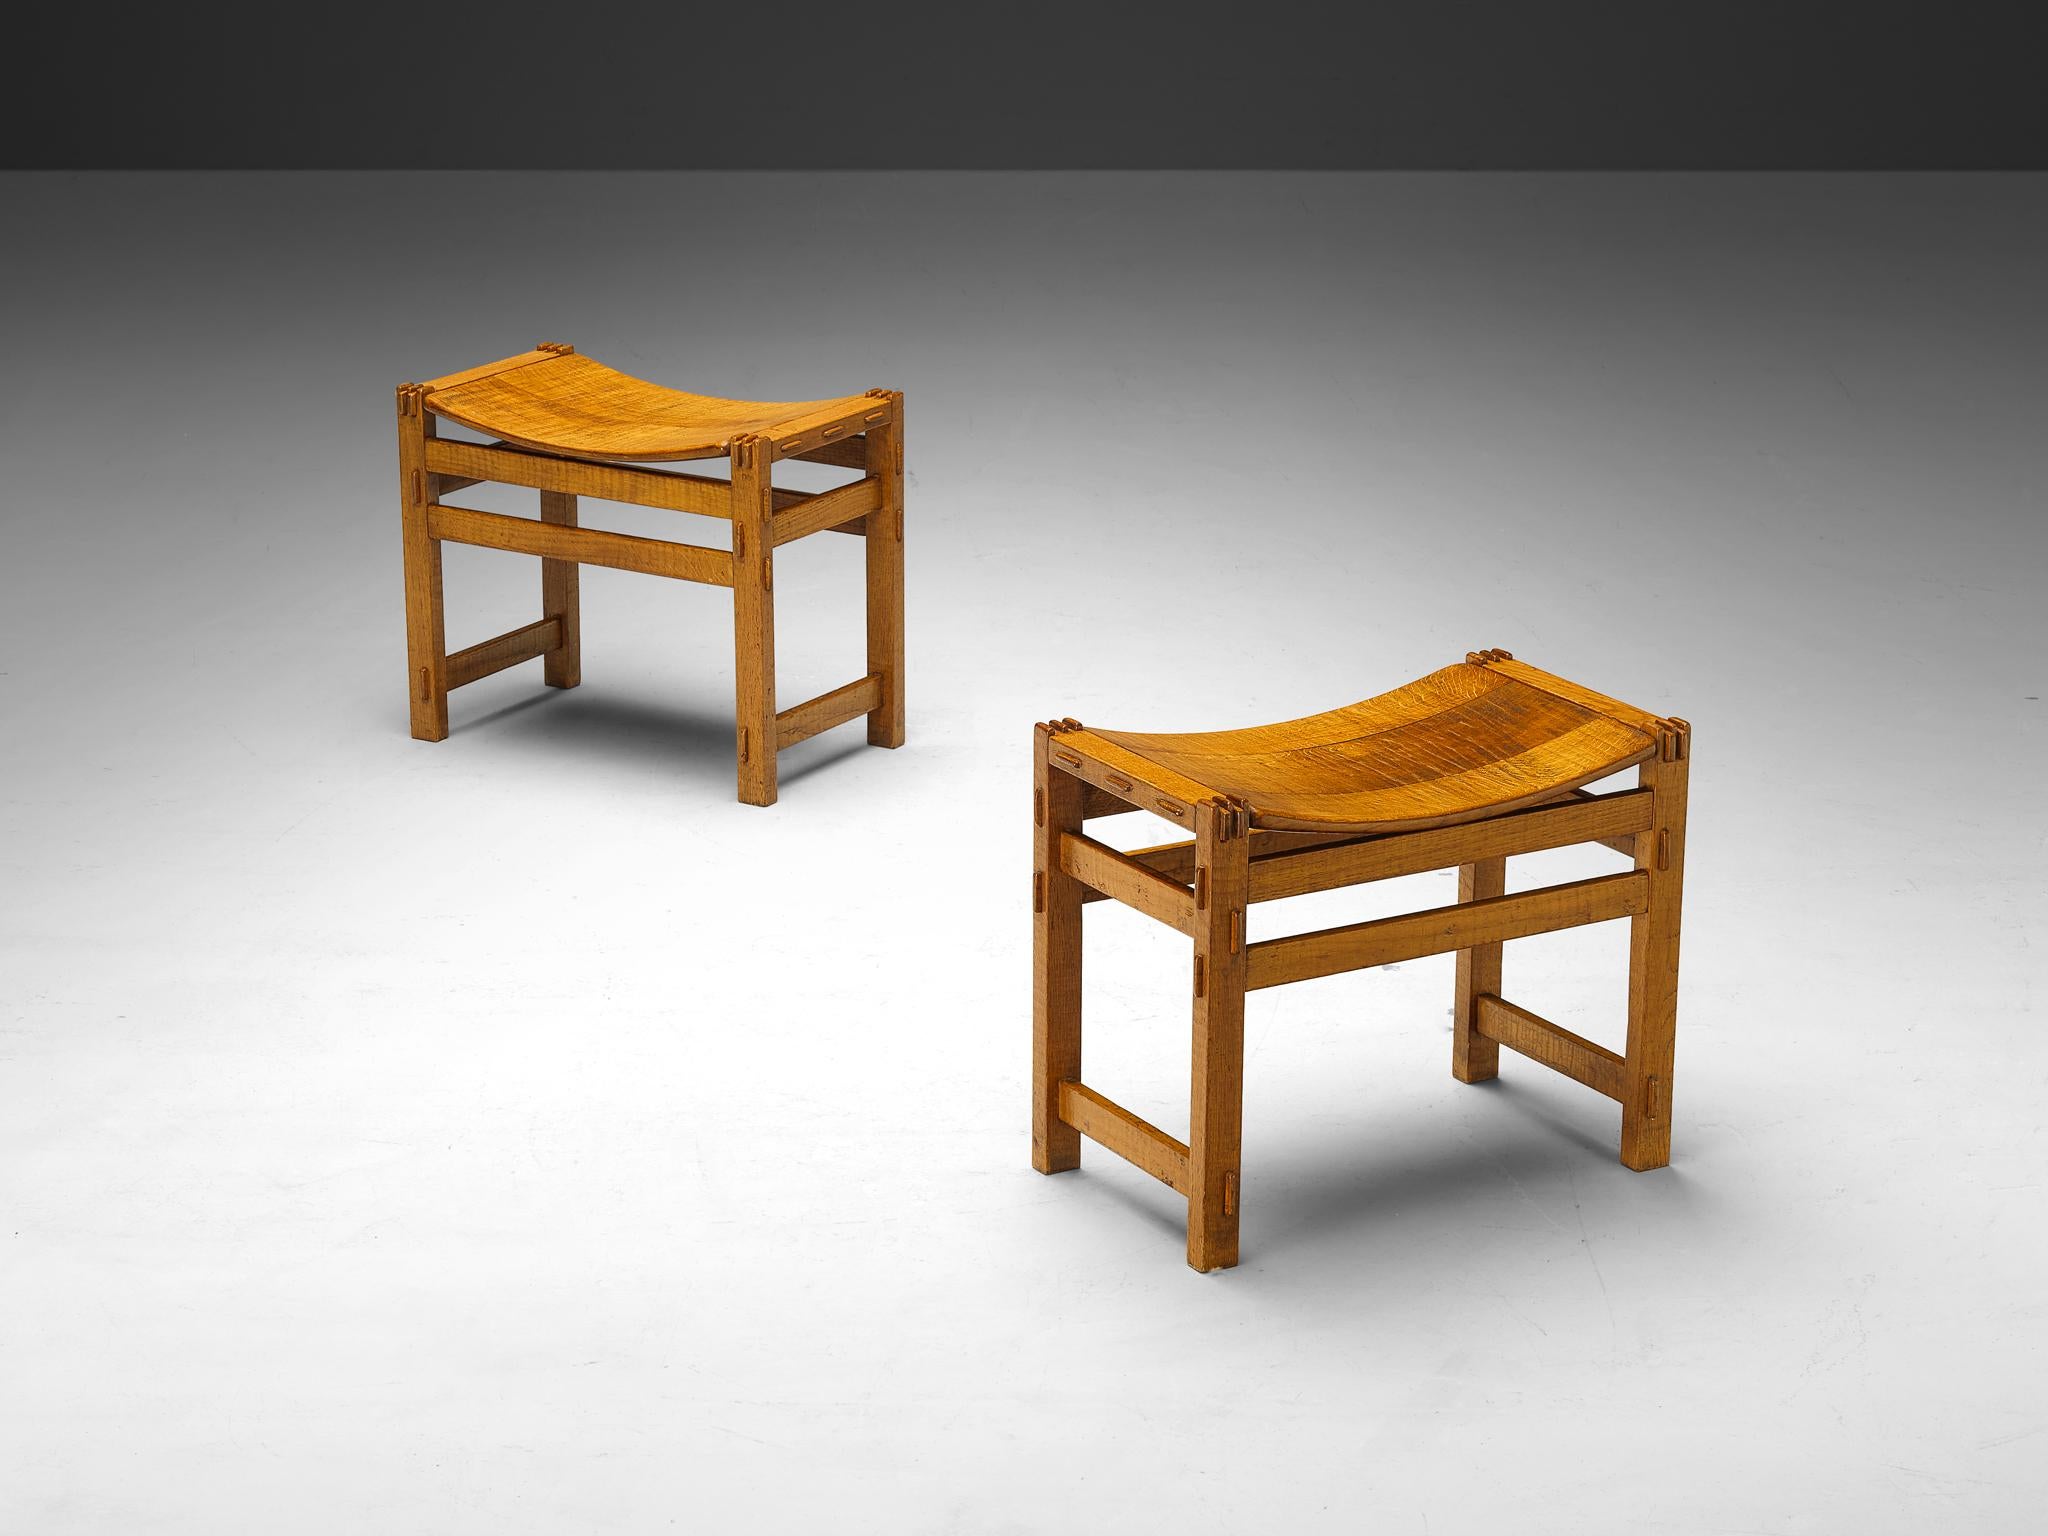 Giuseppe Rivadossi, pair of stools, oak, Italy, 1970s

This remarkable pair of stools, designed by Italian sculptor and artisan Giuseppe Rivadossi, is a testament to the artistry and craftsmanship inherent in fine woodworking. Constructed from